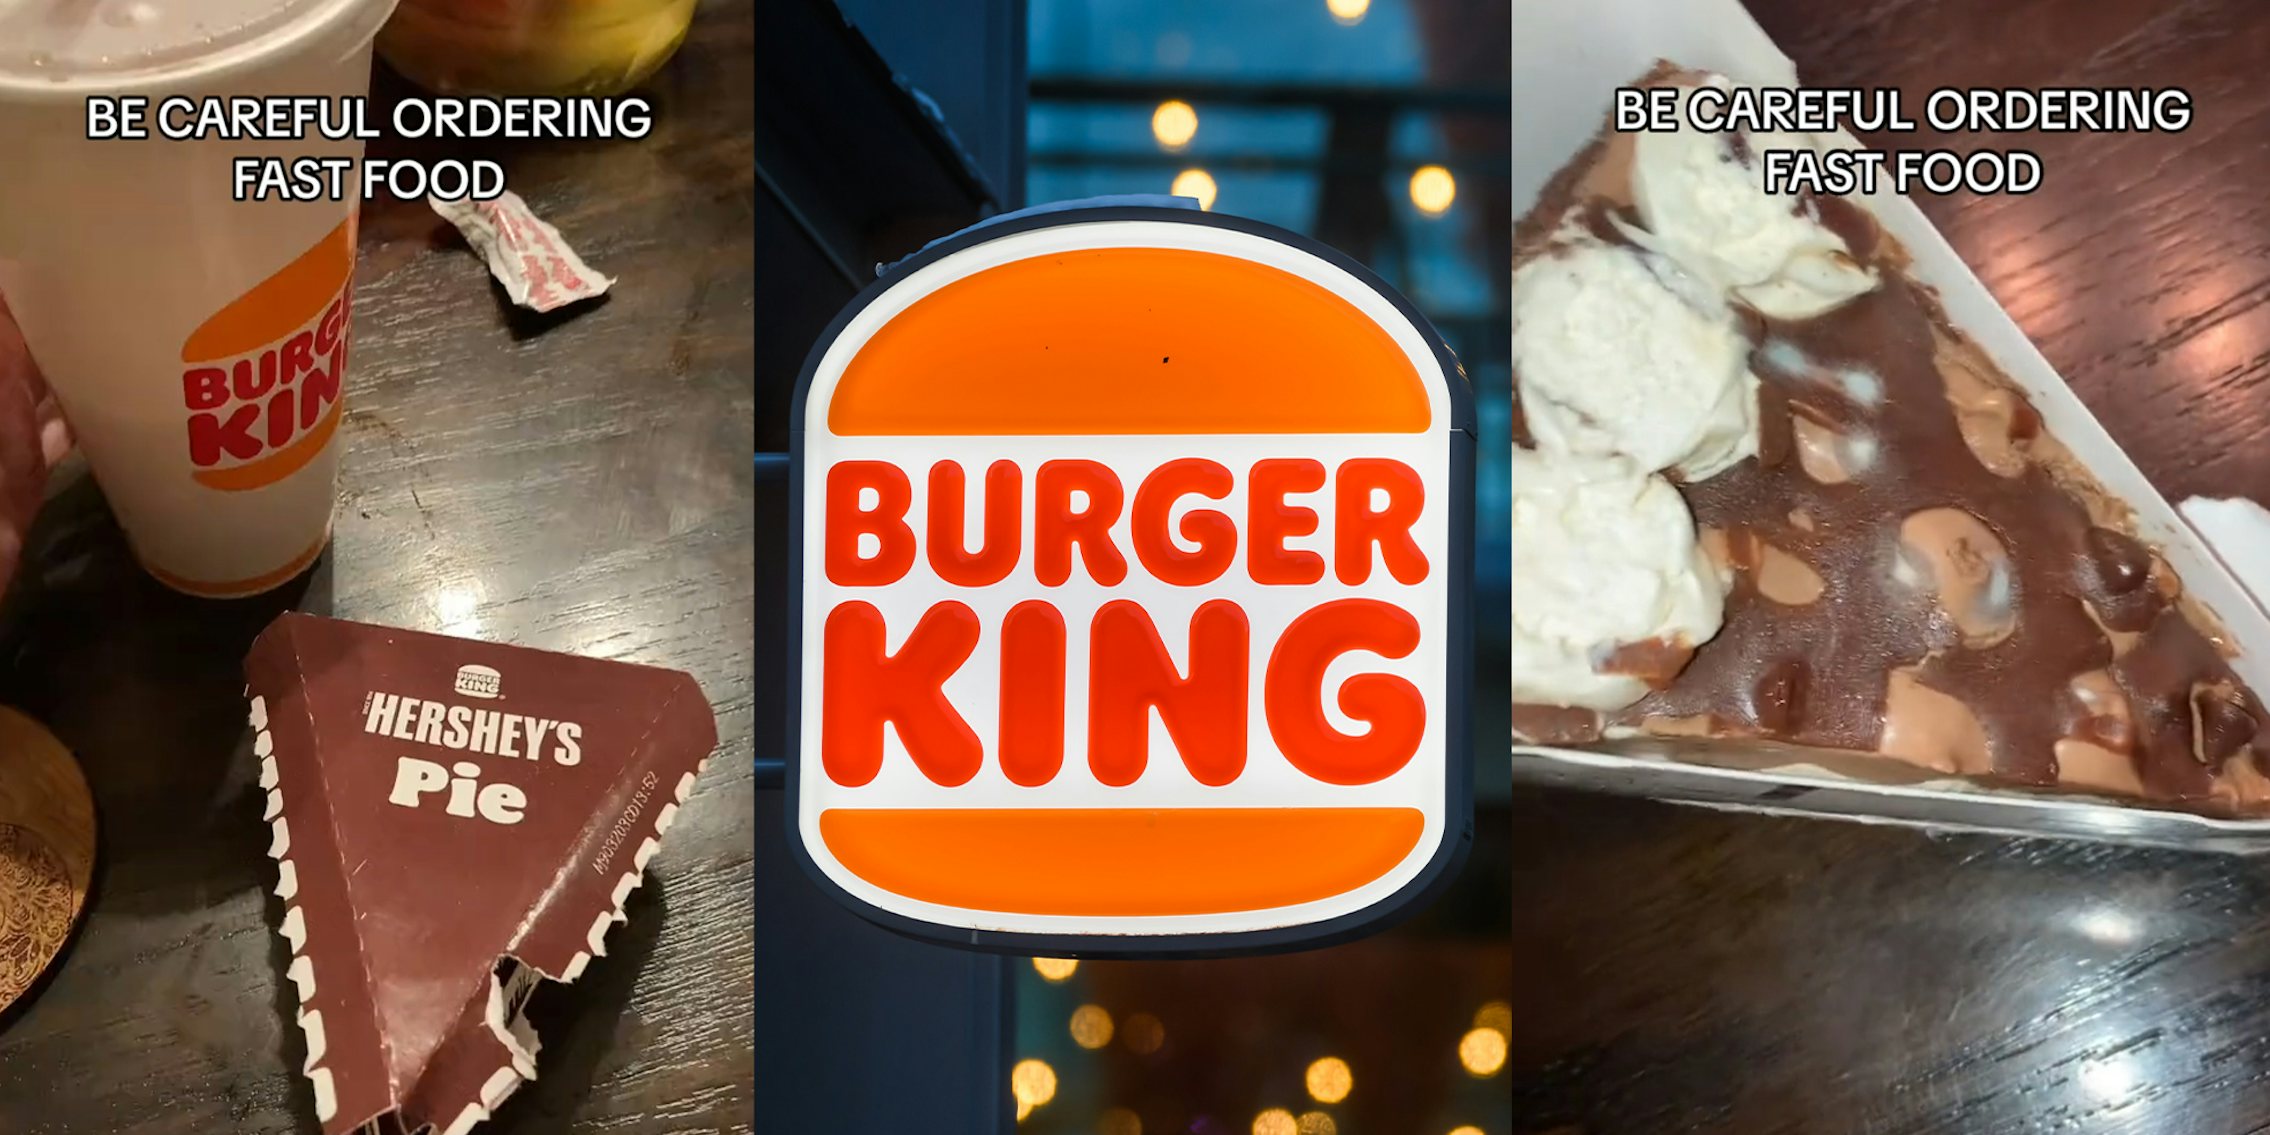 Burger King customers find mold on their Hershey's chocolate pie